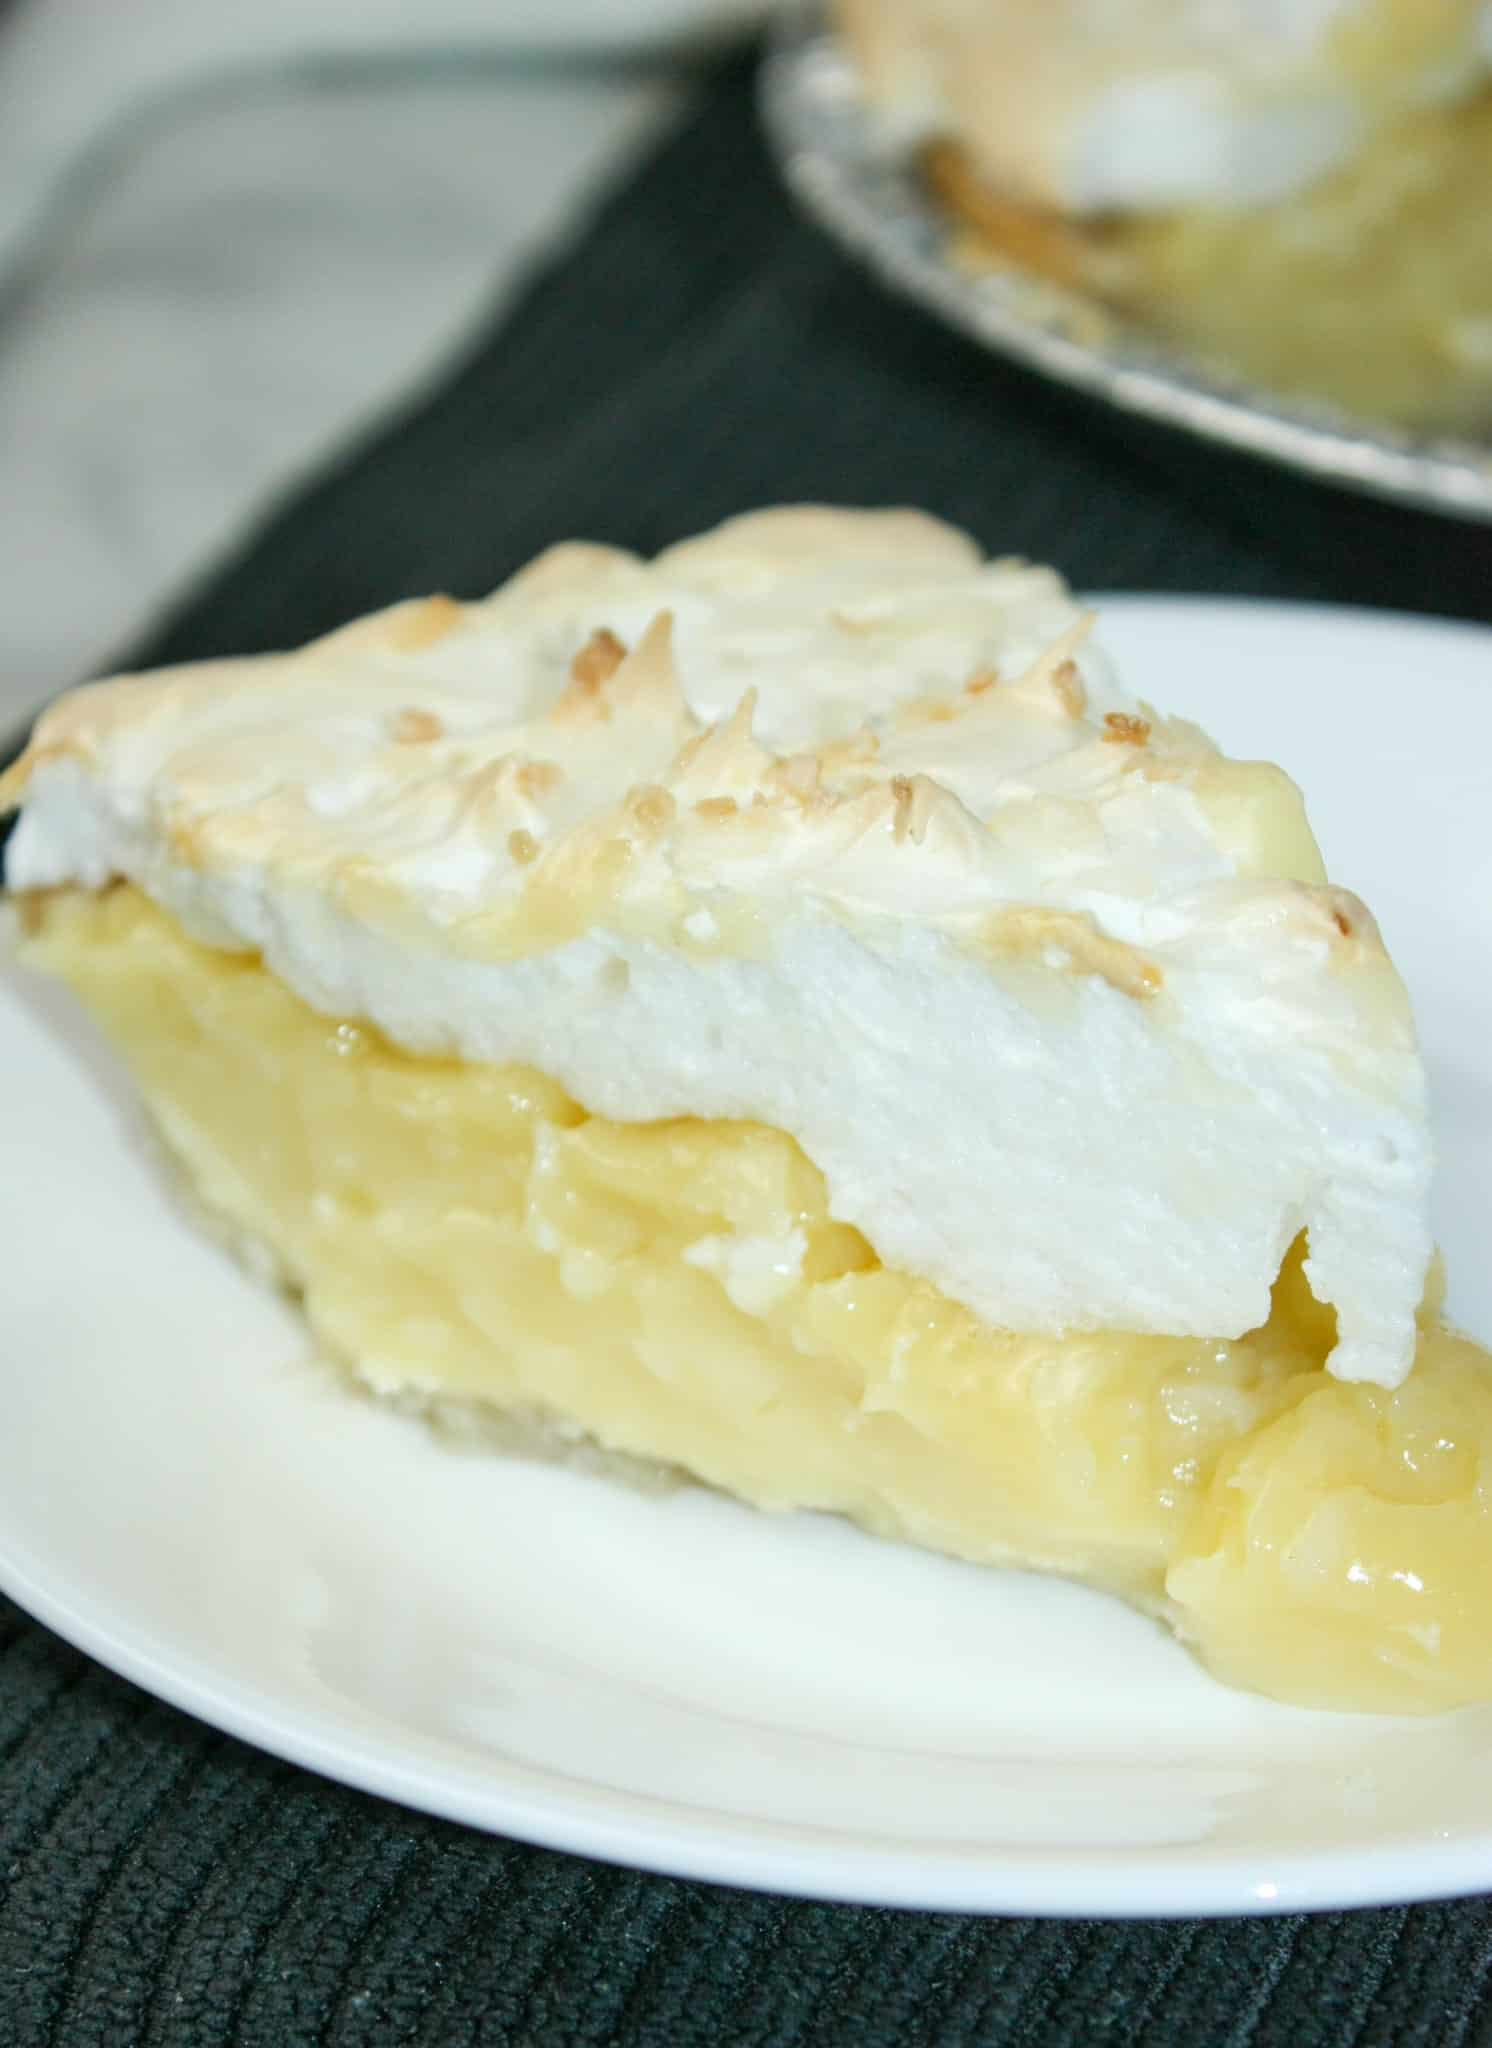 I have been missing one of my favourite pies due to gluten and dairy intolerance.  This version of Coconut Cream Pie was a delicious treat for me, as well as for those without any intolerances.